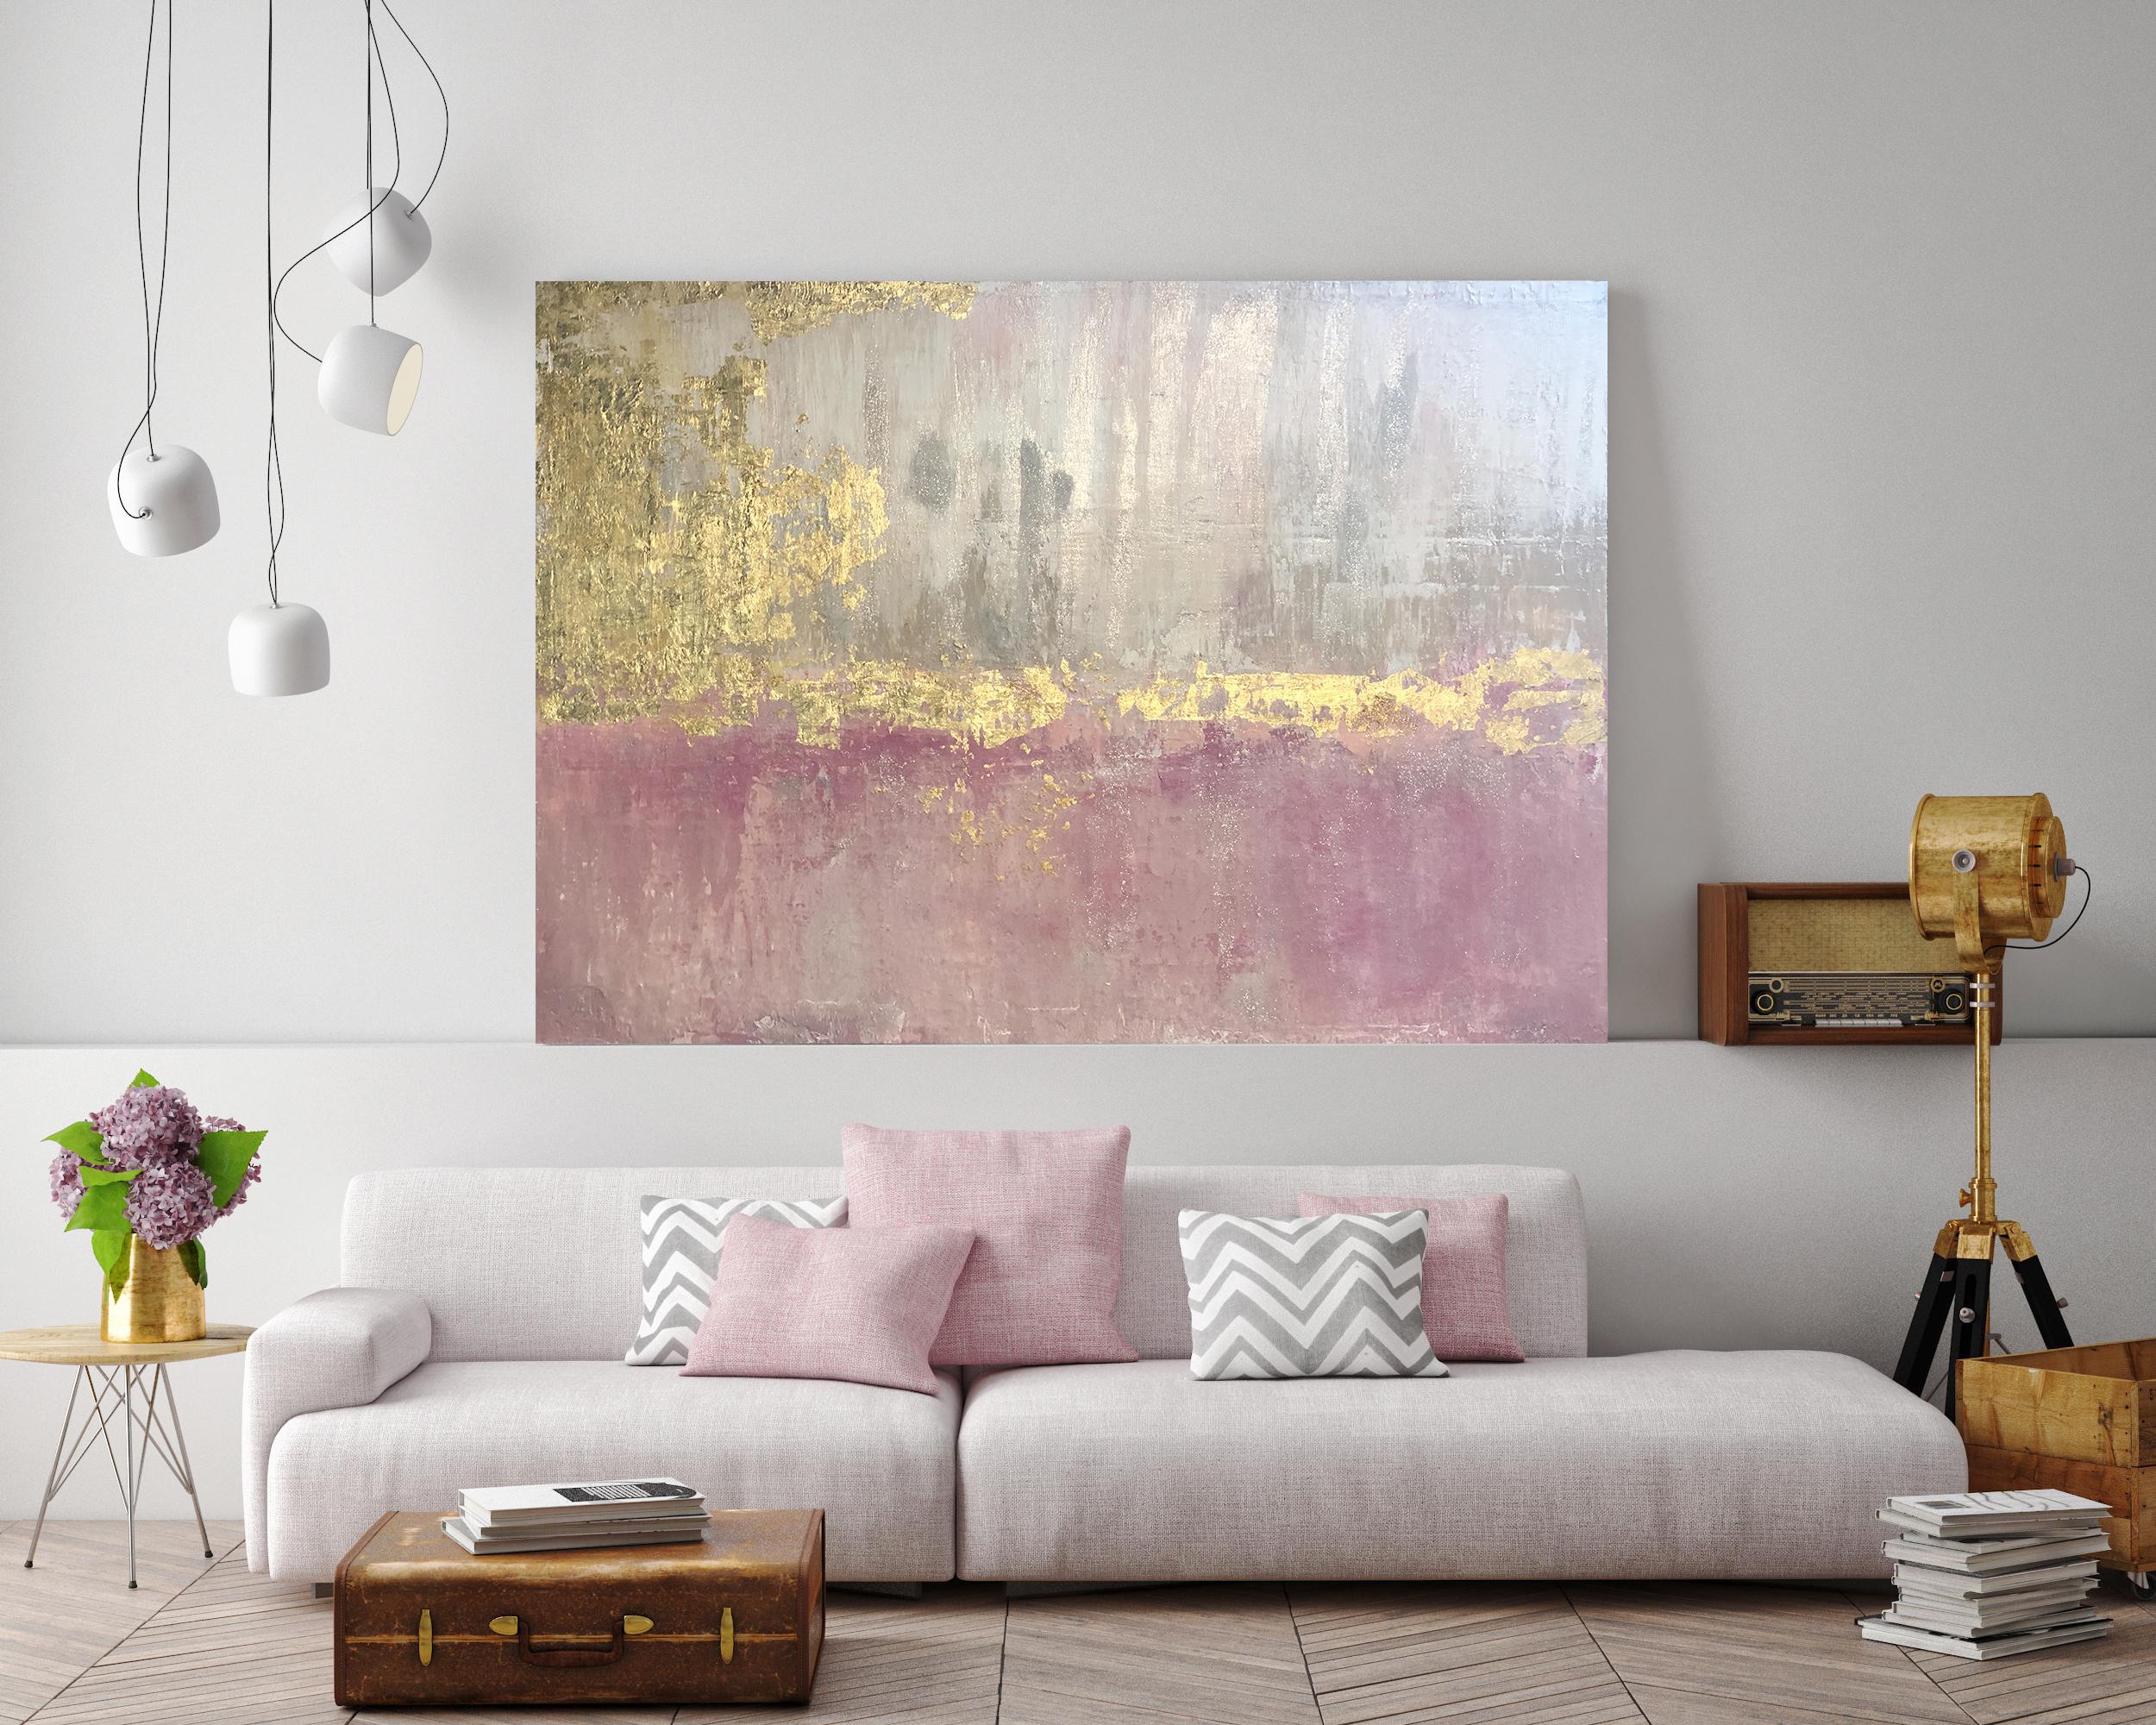 Irena Orlov Abstract Painting - Gold Leaf Pink Silver Abstract Textured Art on Canvas 36 x 48" Pink Golden Fog